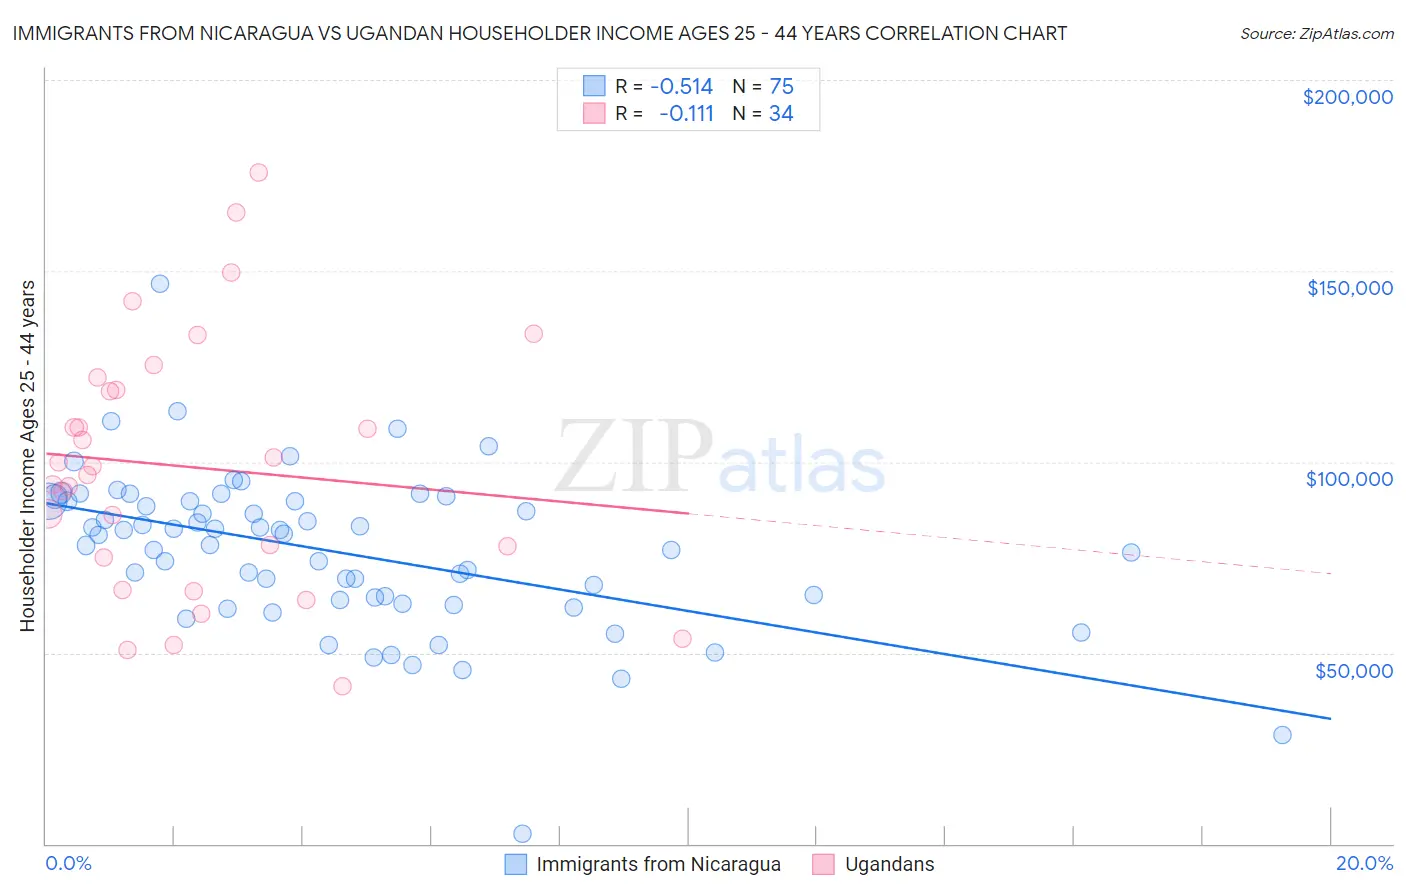 Immigrants from Nicaragua vs Ugandan Householder Income Ages 25 - 44 years